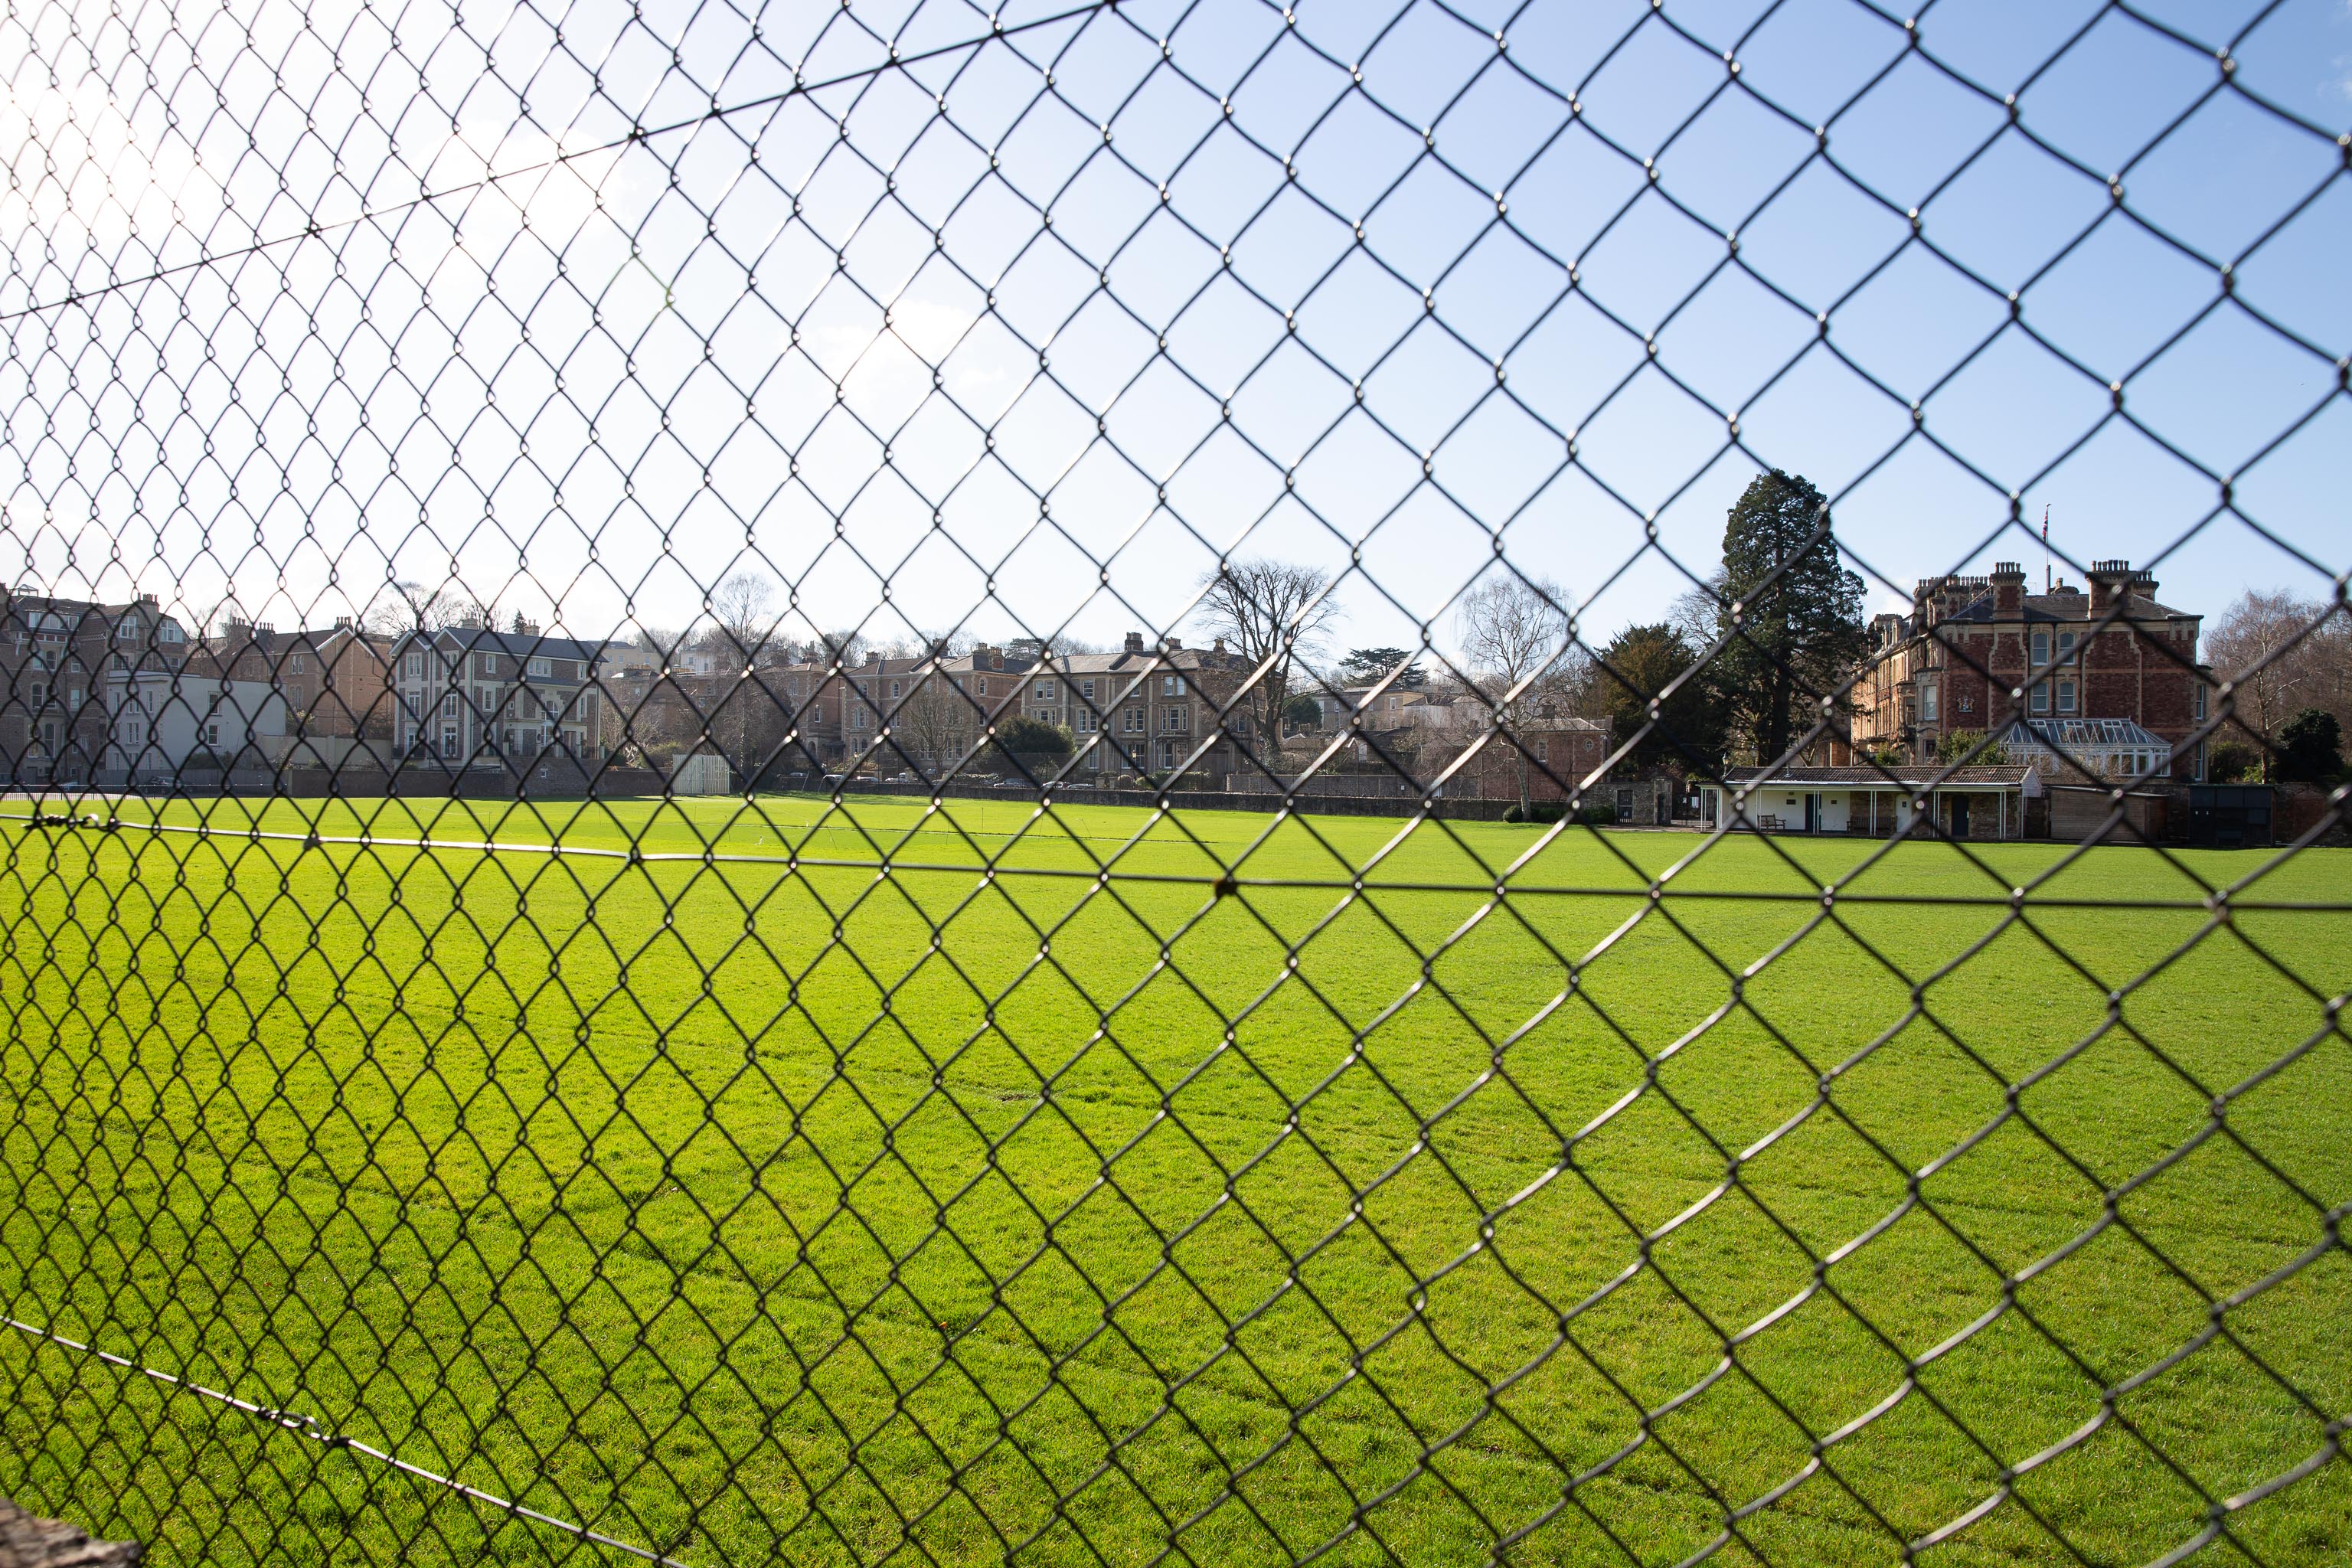 College Fields
These are Clifton College's Prep School's fields, for rugby and cricket, of course. Not far away, adjacent to the main College, lies the seniors' C...